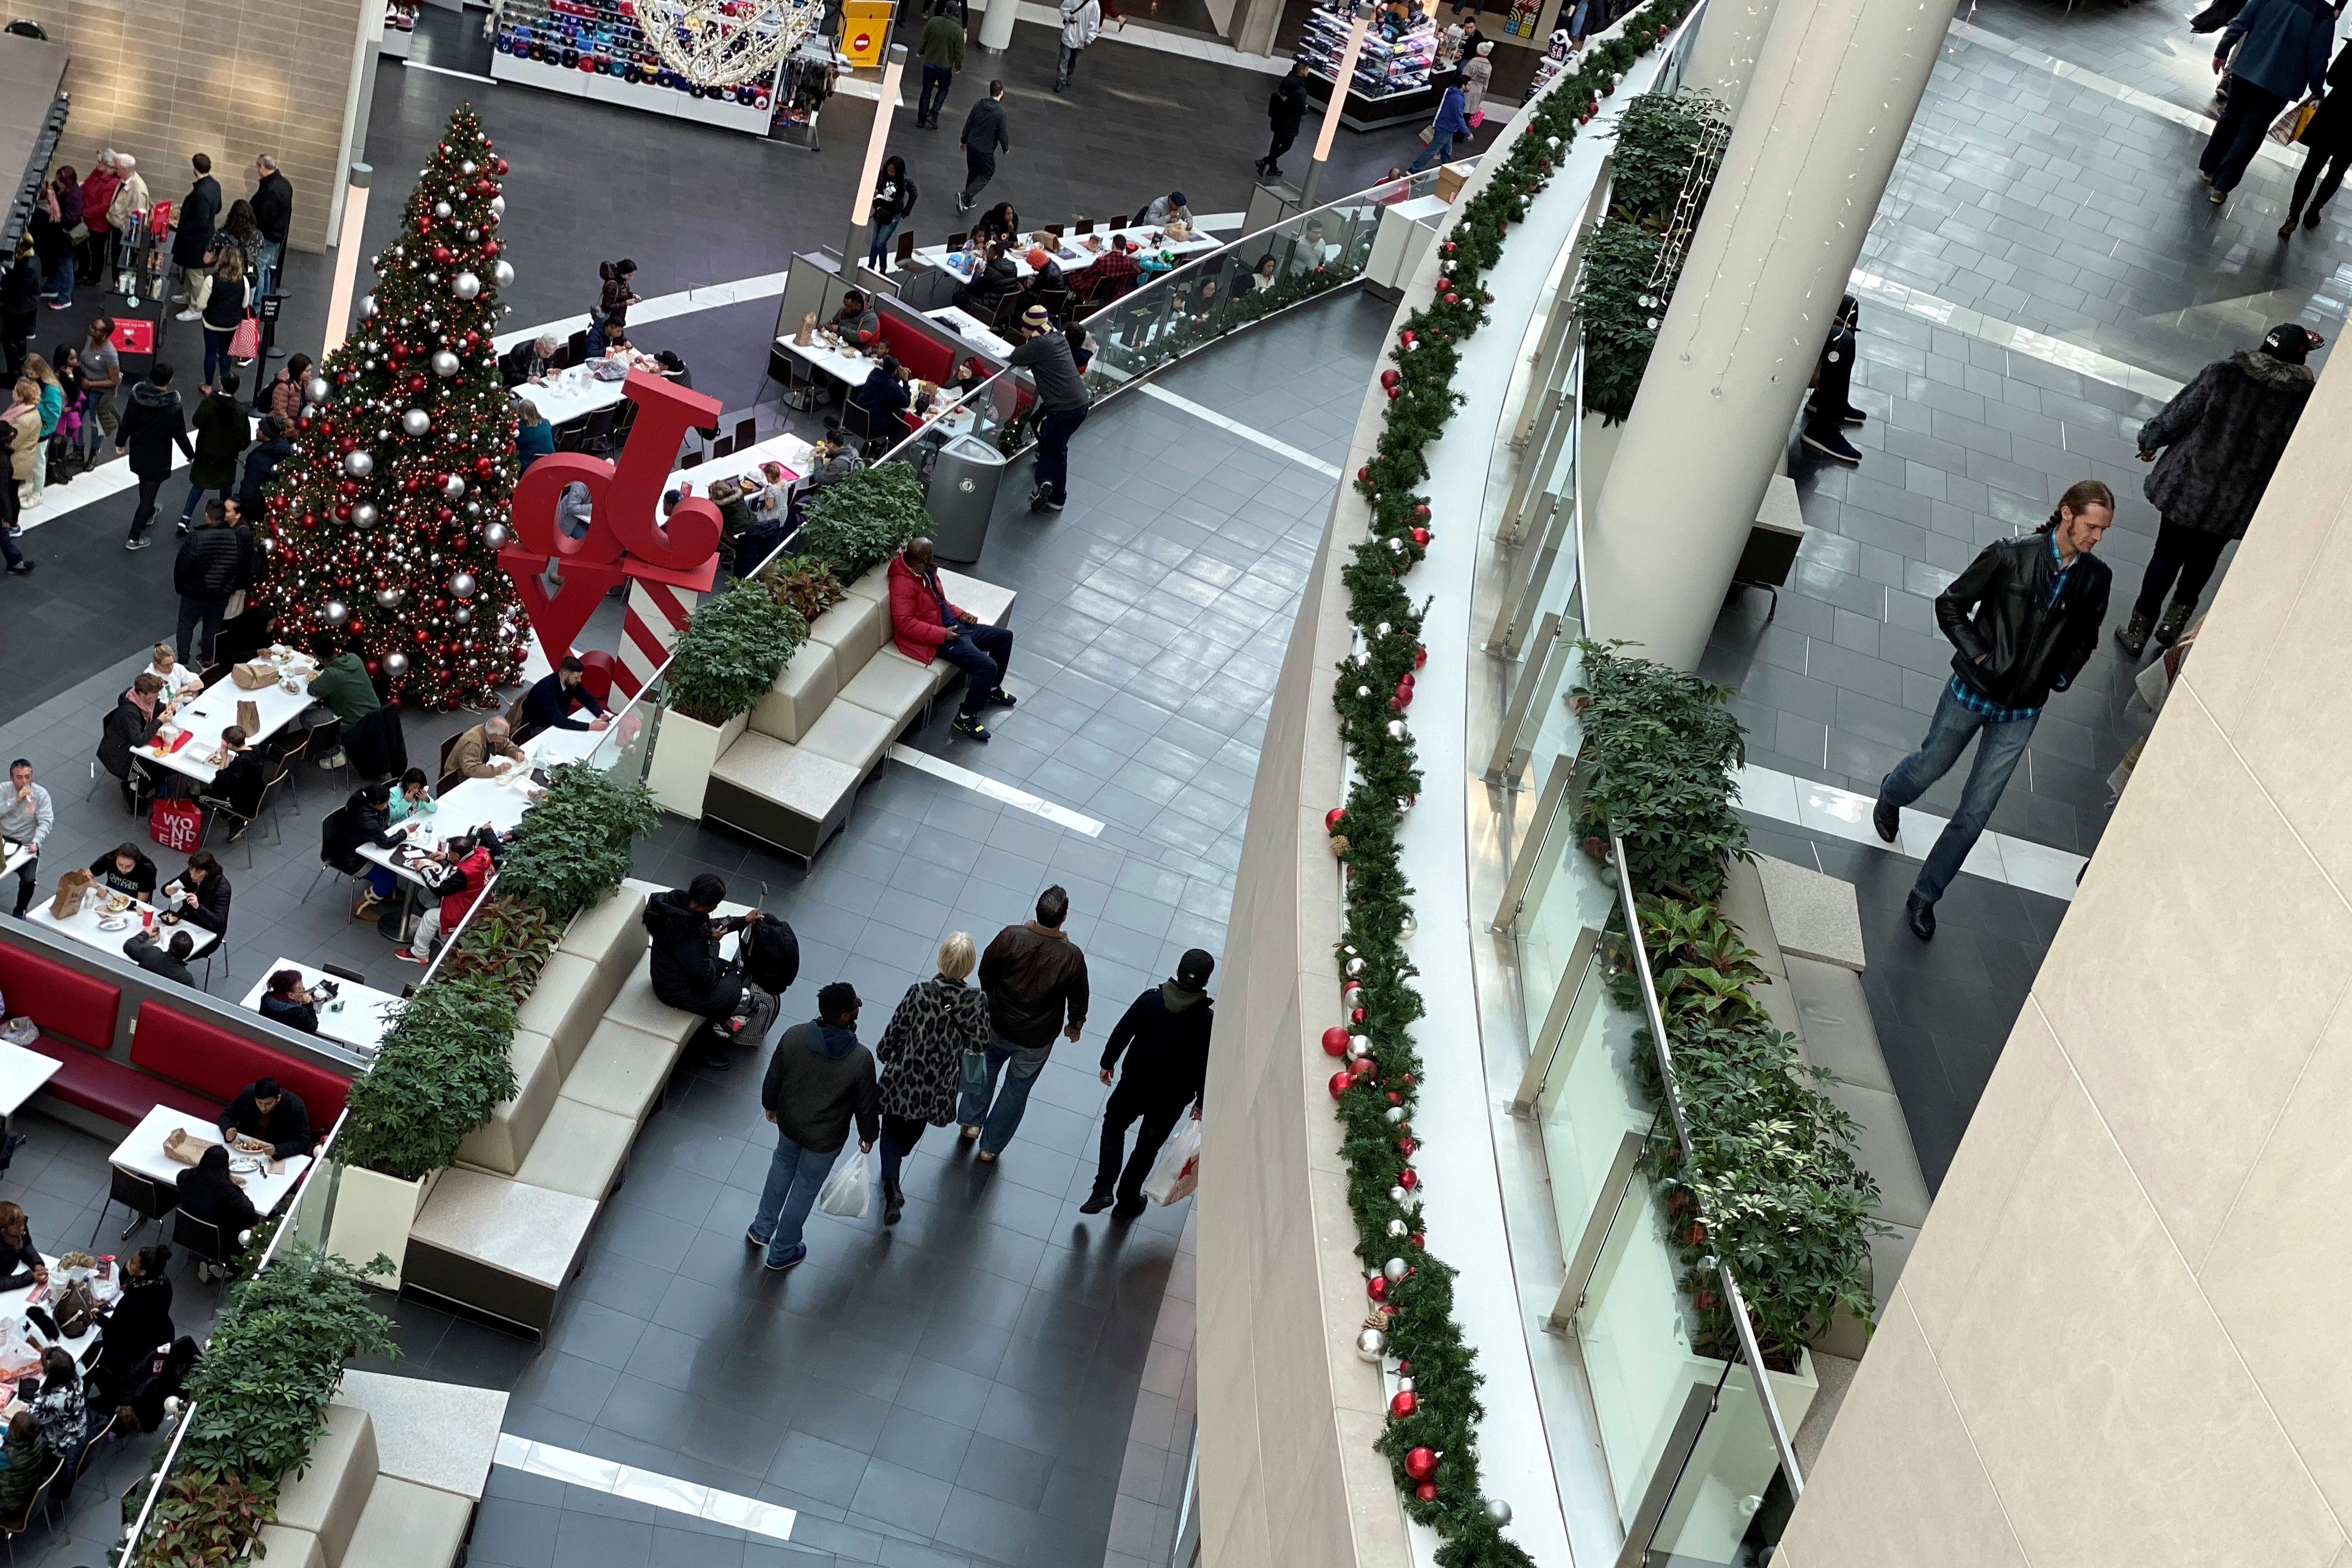 Shoppers make their way through Fashion Centre at Pentagon City, decorated for the holidays, in Arlington, Virginia